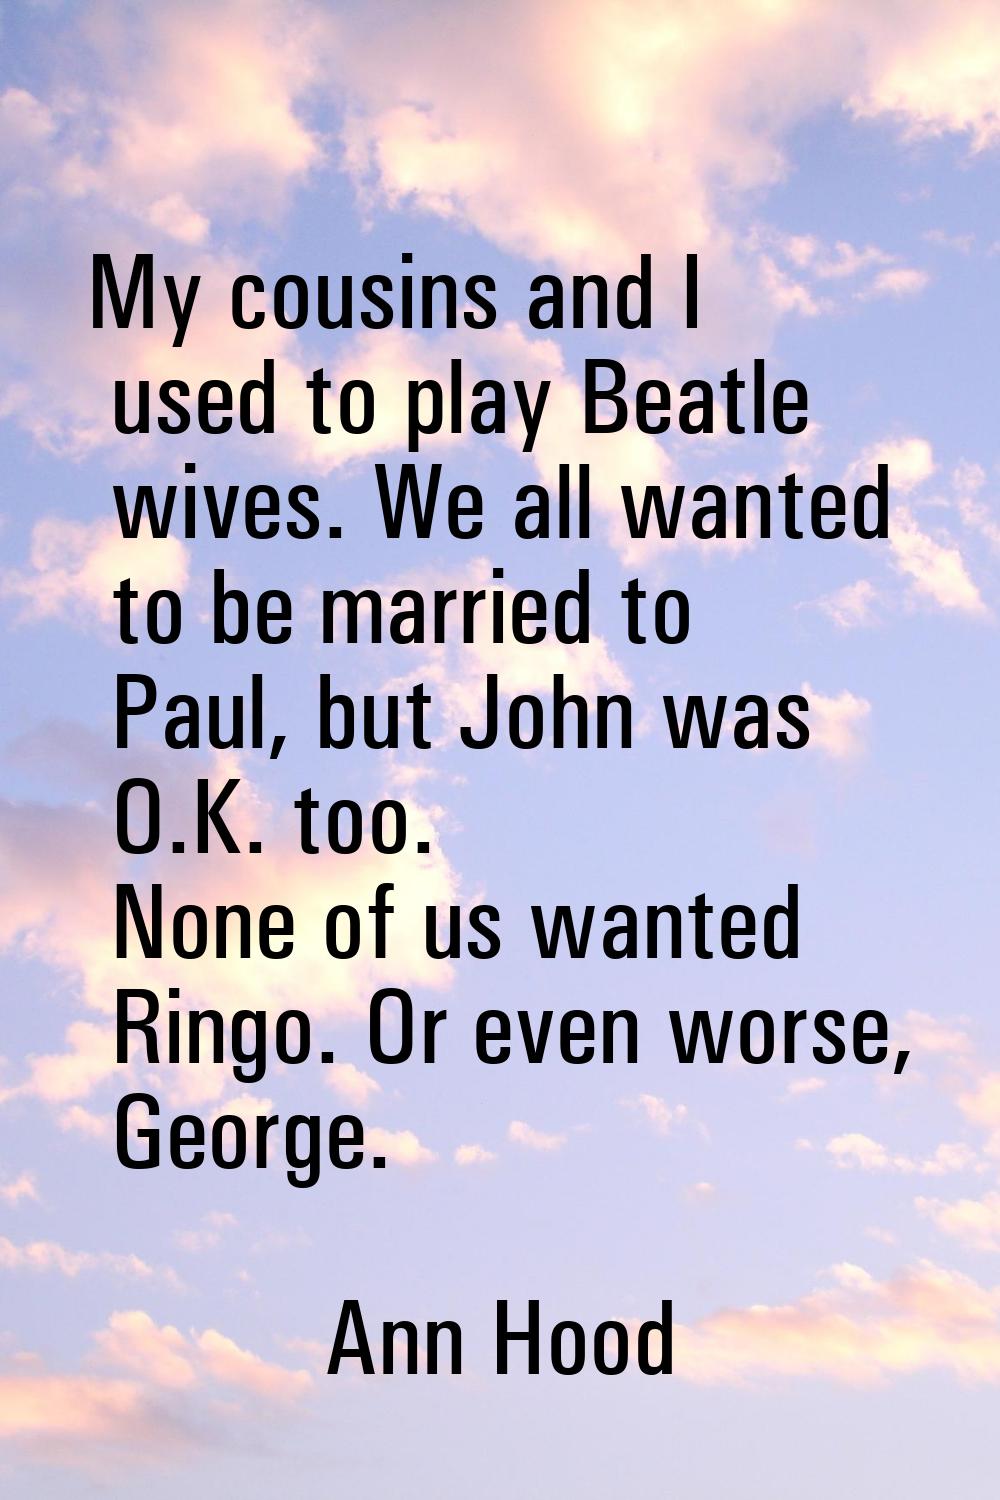 My cousins and I used to play Beatle wives. We all wanted to be married to Paul, but John was O.K. 